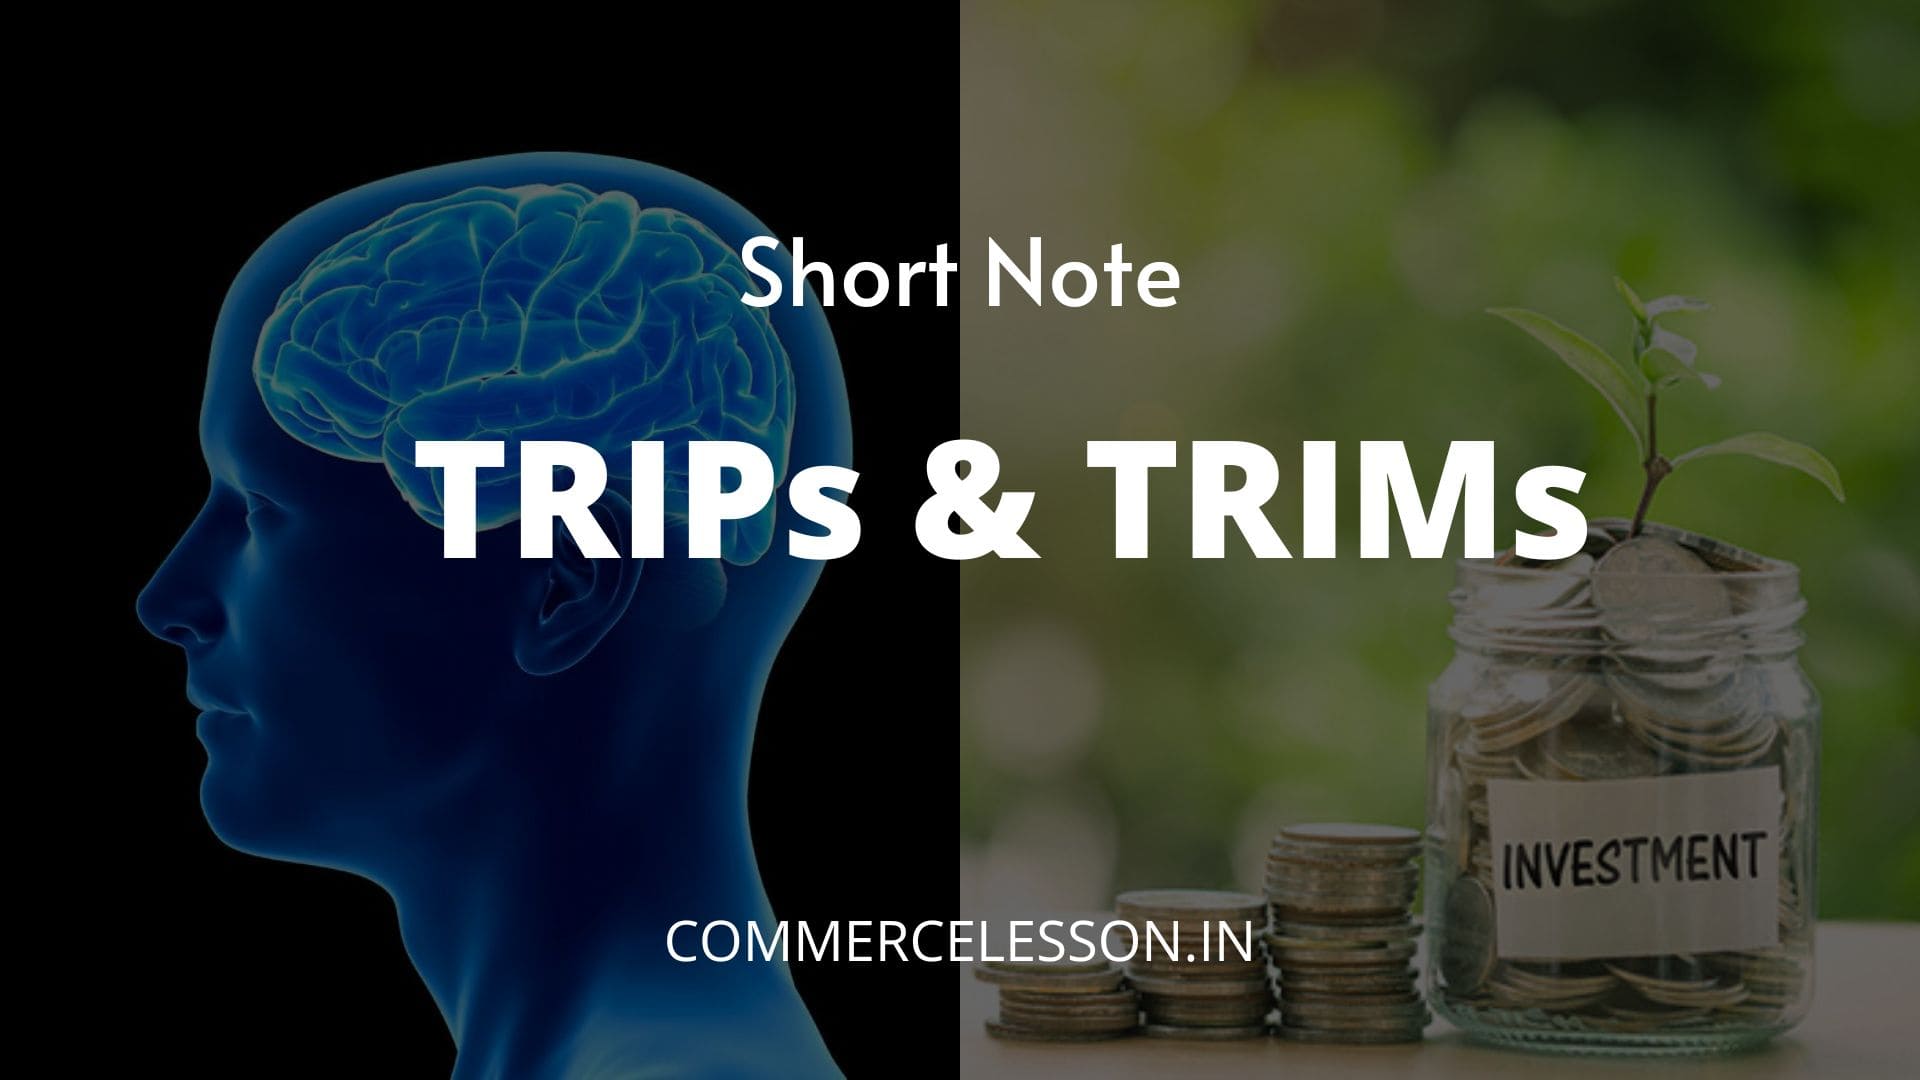 TRIPs and TRIMs Short Note